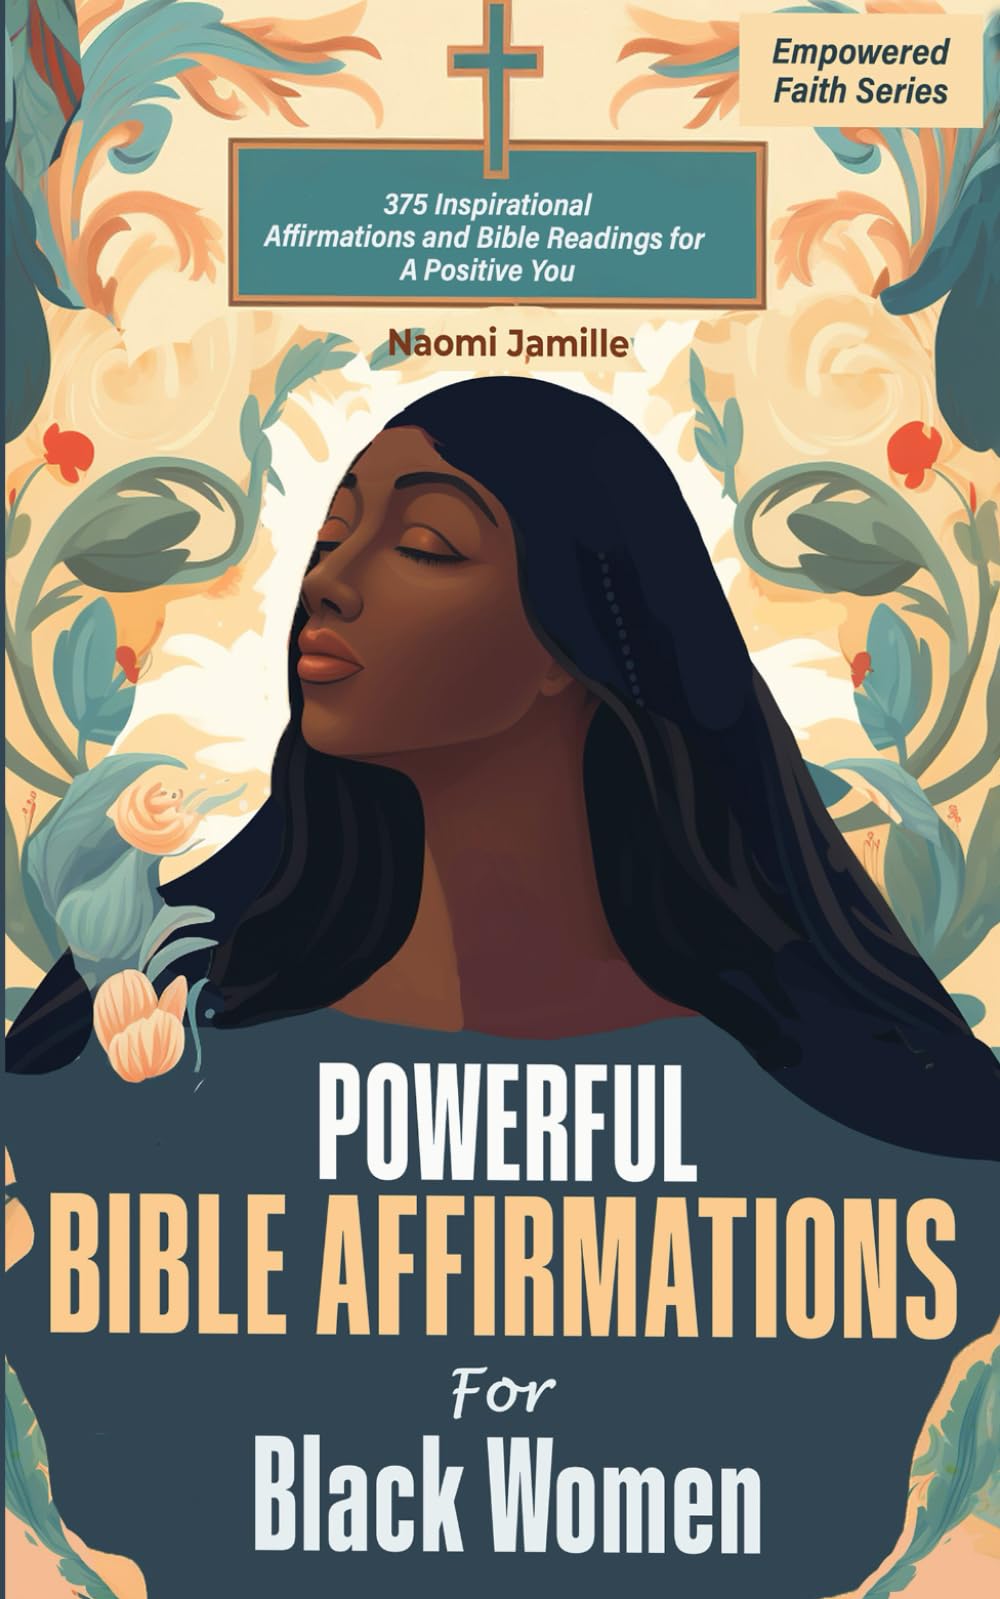 Powerful Bible Affirmations For Black Women: 375 Inspirational Affirmations and Bible Readings for A Positive You (Empowered Faith Series)